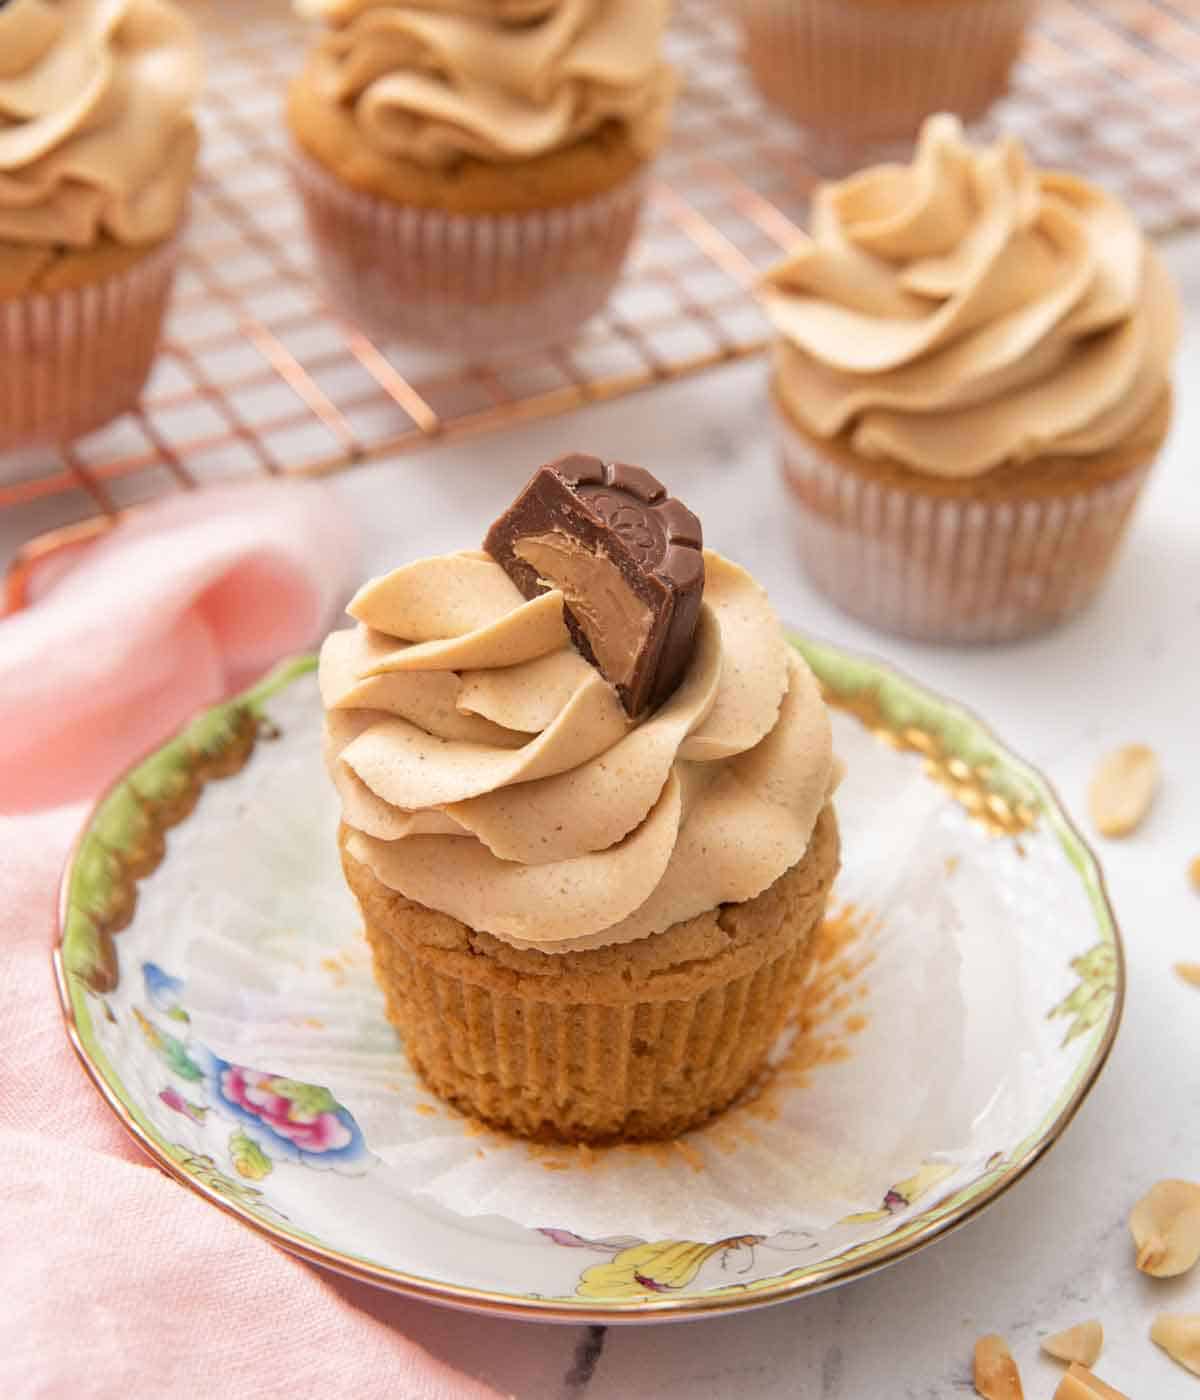 A plate with a peanut butter cupcake with the paper liner peeled opened with more cupcakes in the back.